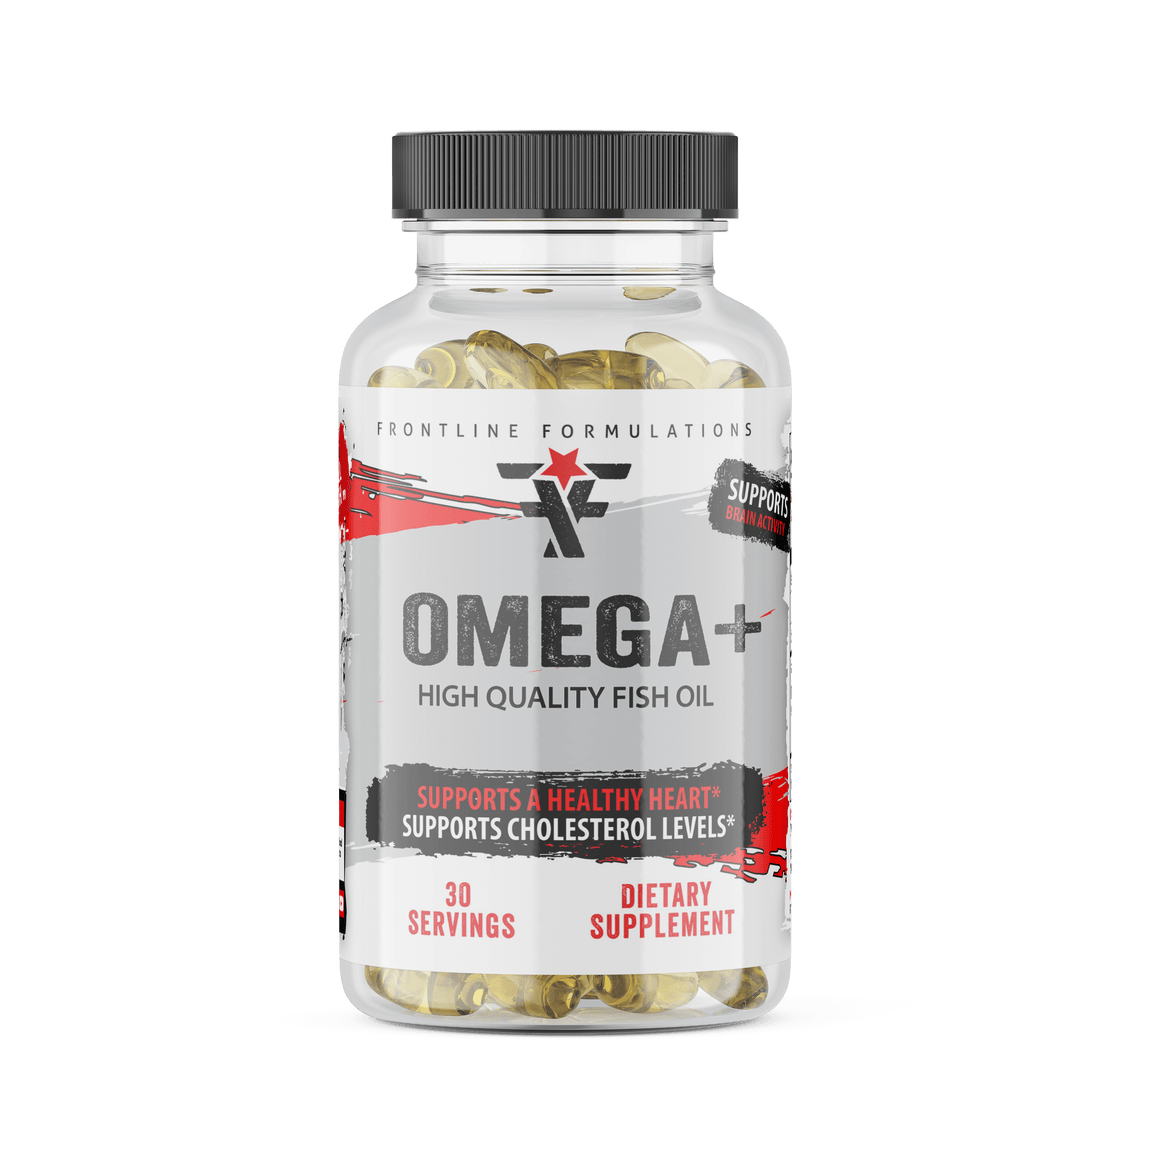 Frontline Formulations Omega+ Omega+ Omega 3 Vitamins (90 capsules) High quality fish oil: made from fresh, wild-caught fish so you get up to 3x more omega-3 fatty acids. Refined using molecular distillation to preserve the purity of every capsule which h